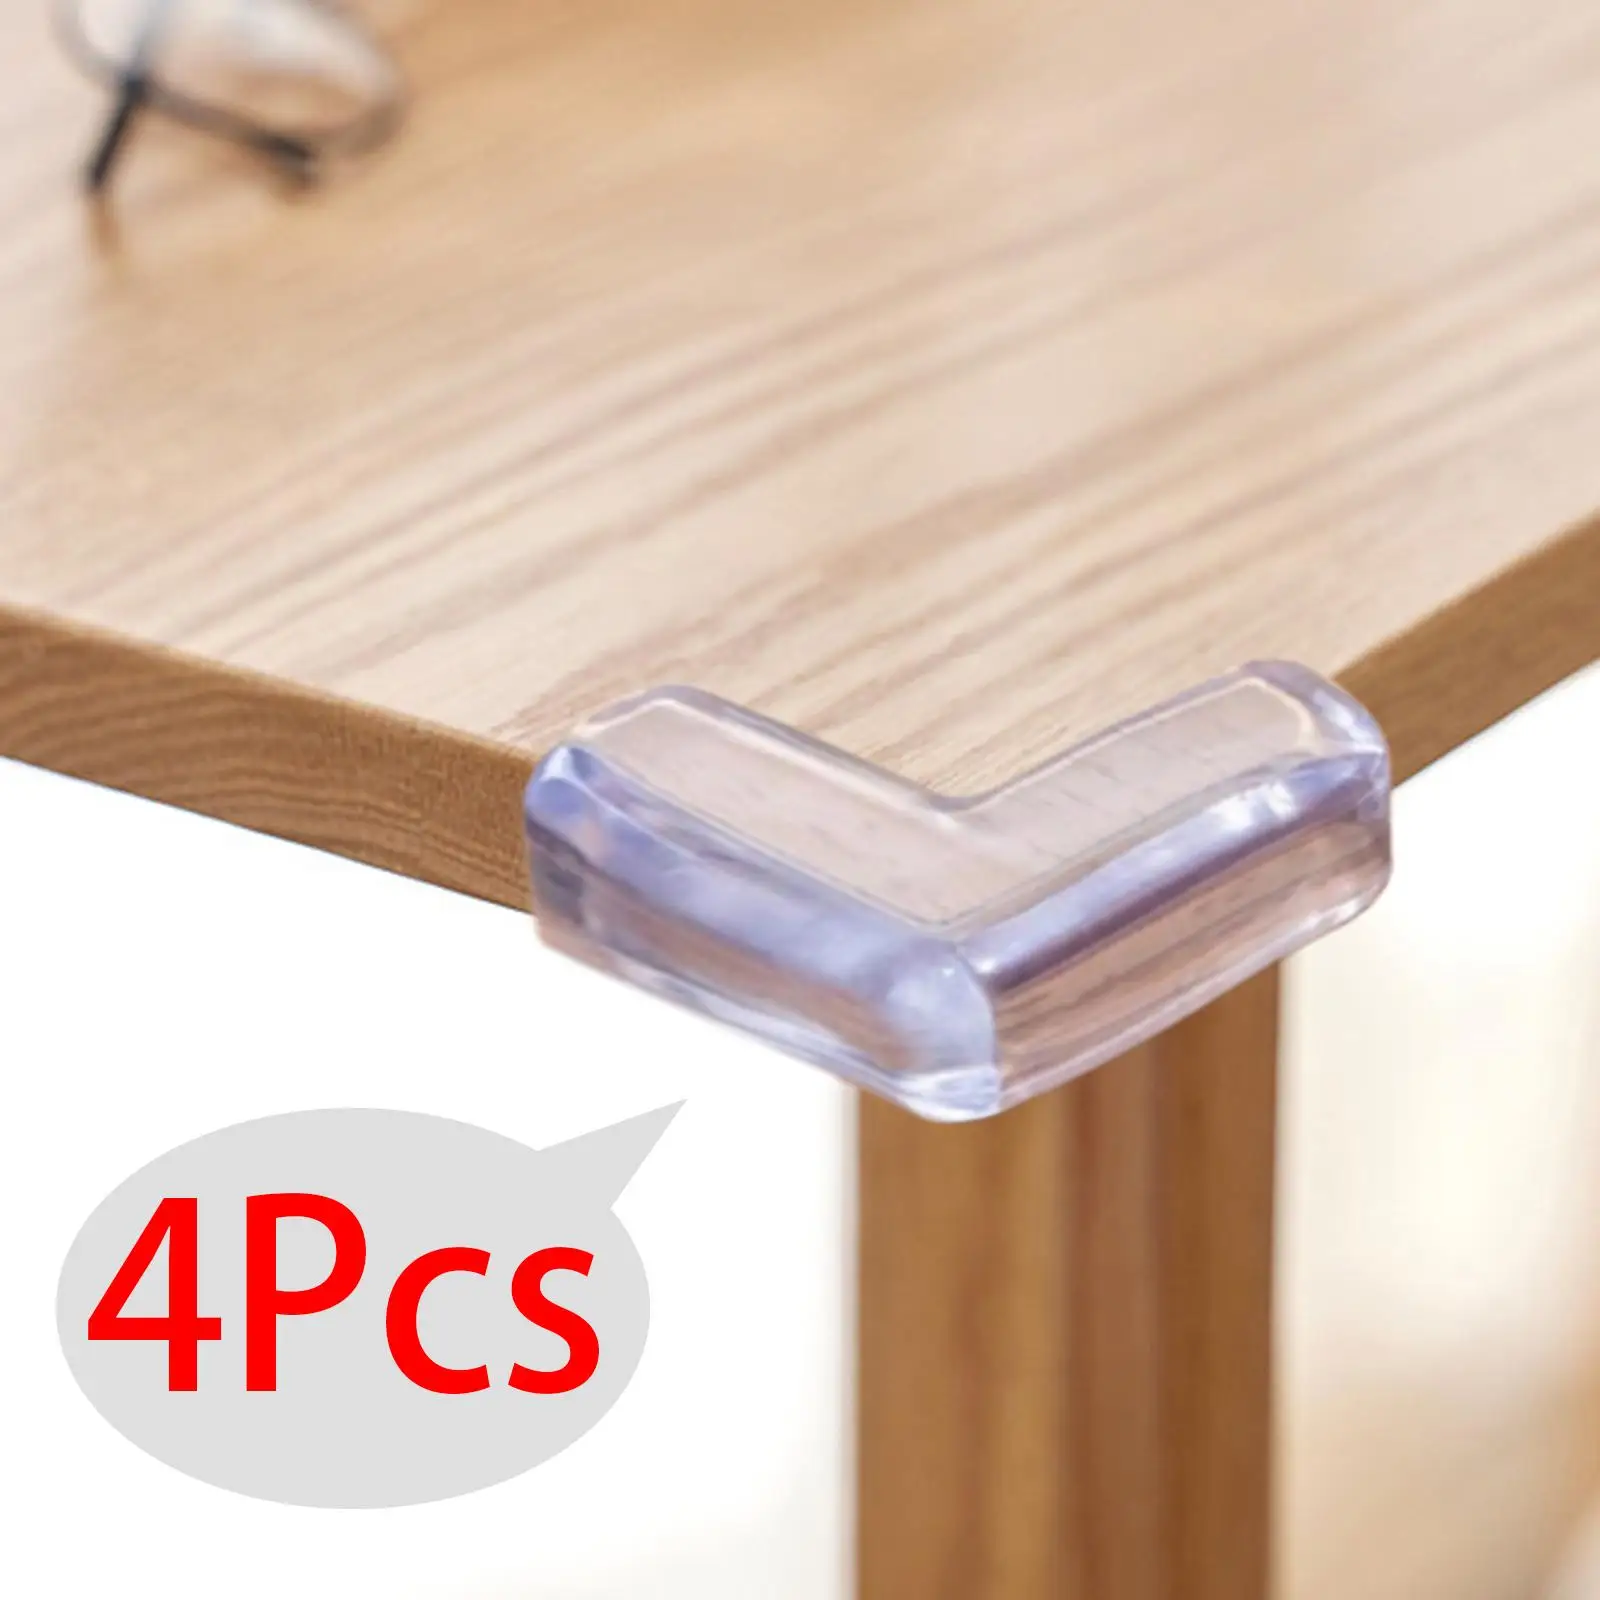 4x Table Corner Edge Protection Baby Proofing Corner Protector Clear Furniture corner guards Desk Edge Cushion for Cabinet Desk